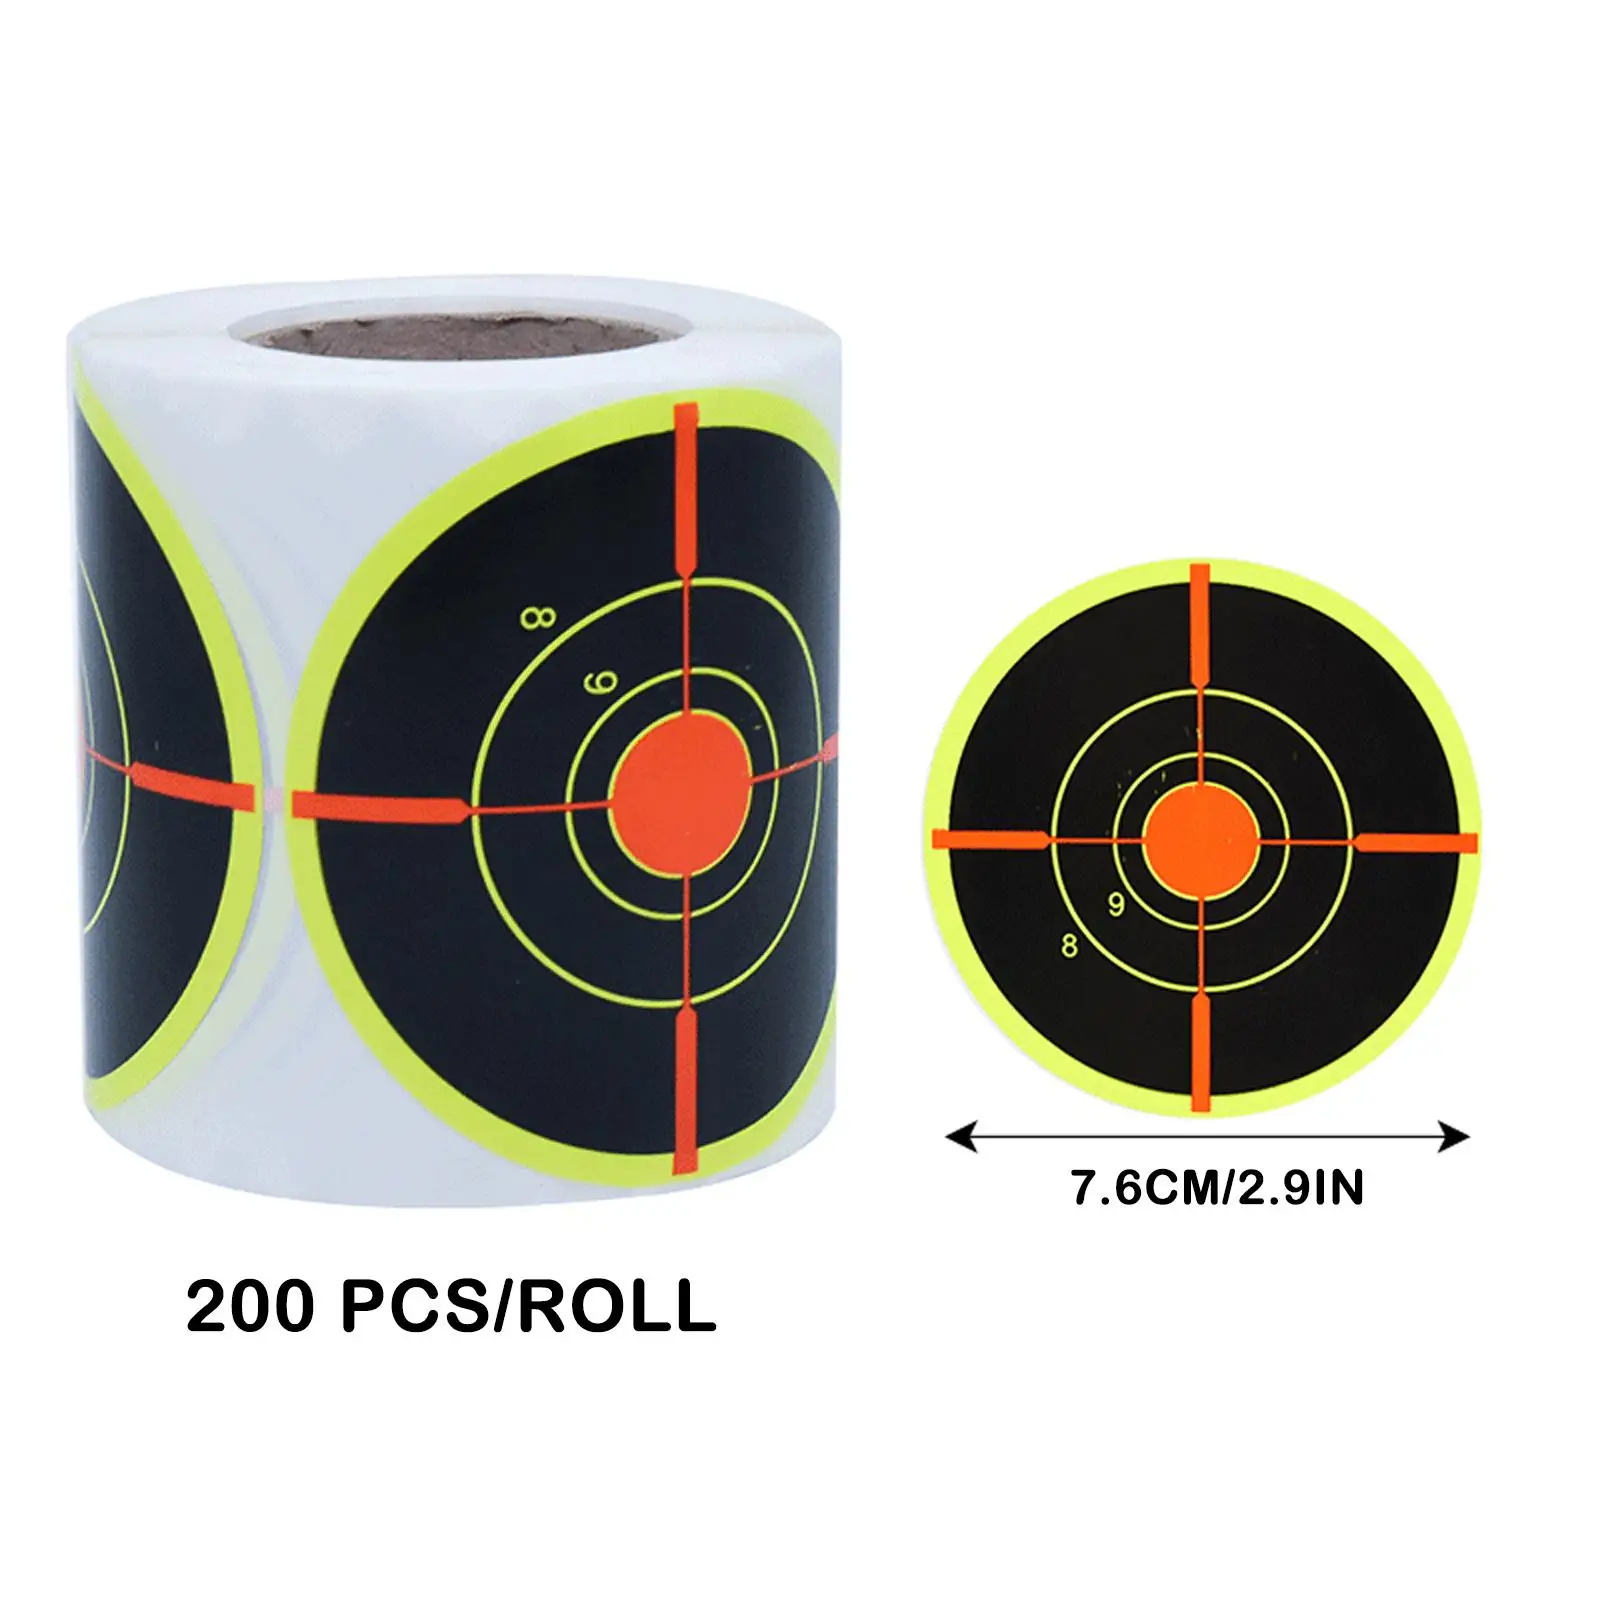 200pcs Shooting Splatter Target Self-adhesive Shoot Flower Objective Targets Stickers for Archery Bow Hunting Shooting Train